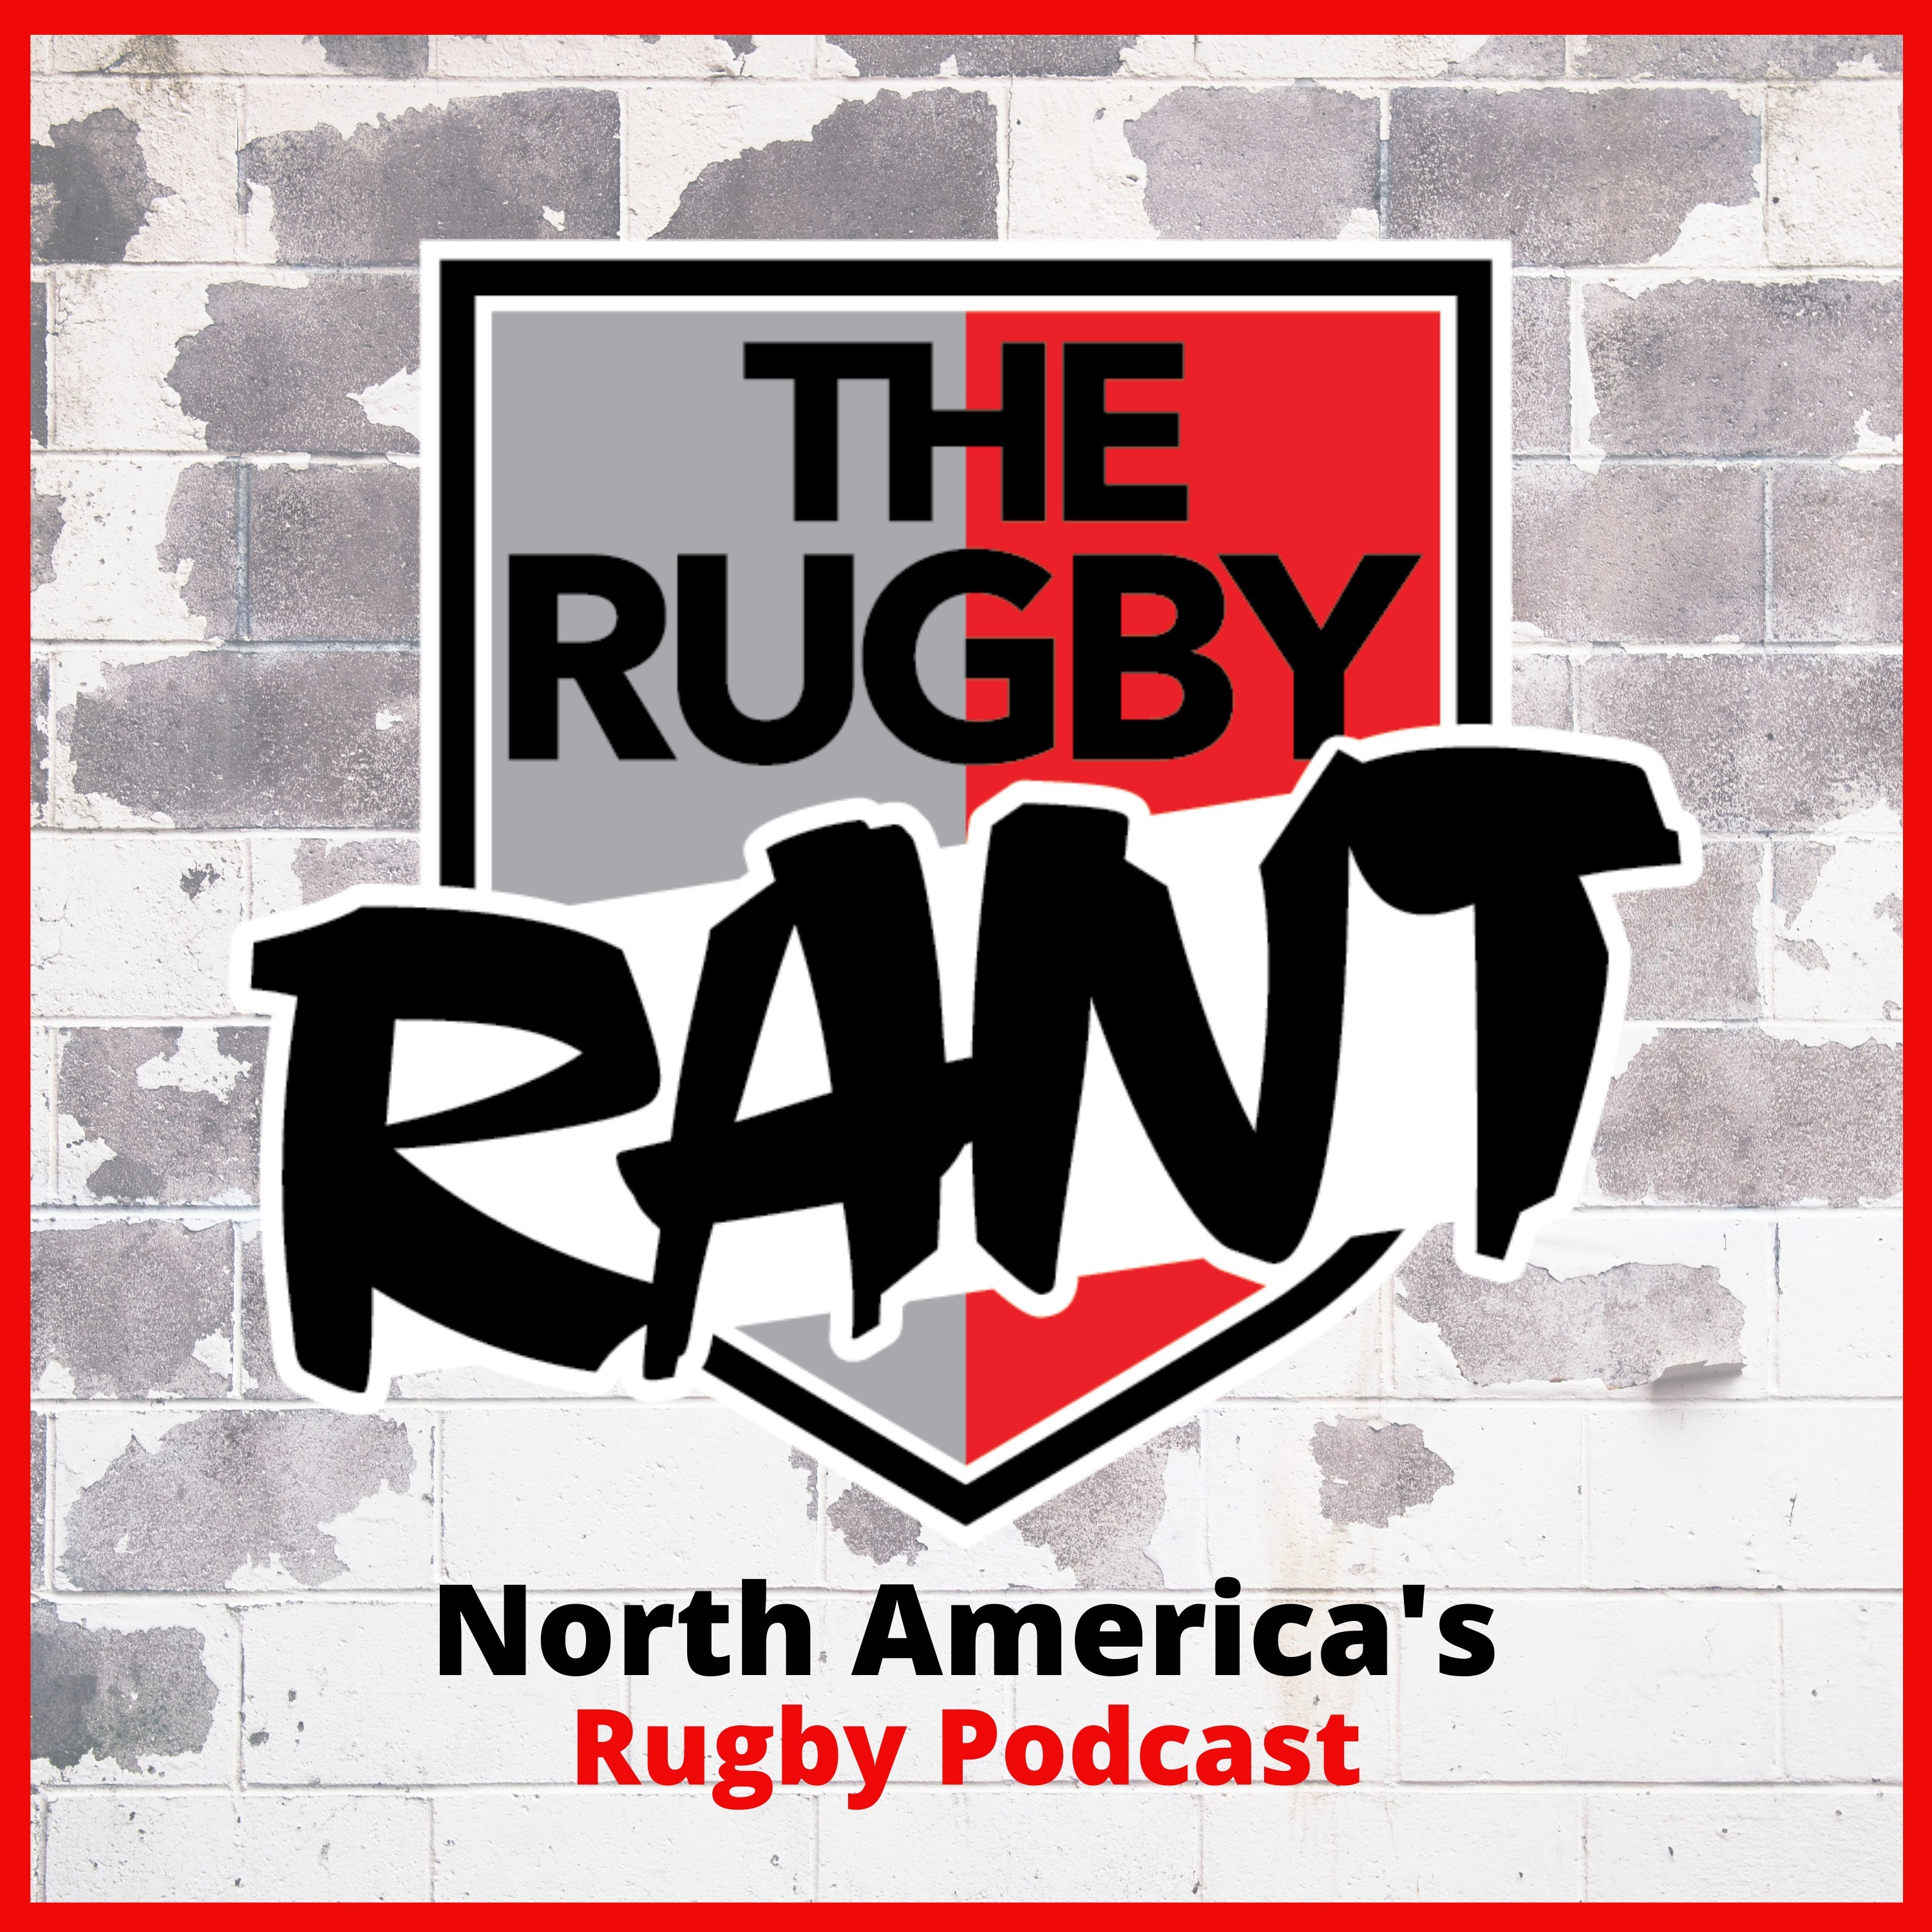 The Rugby Rant - Run, Pass or Kick with McKenna Strong